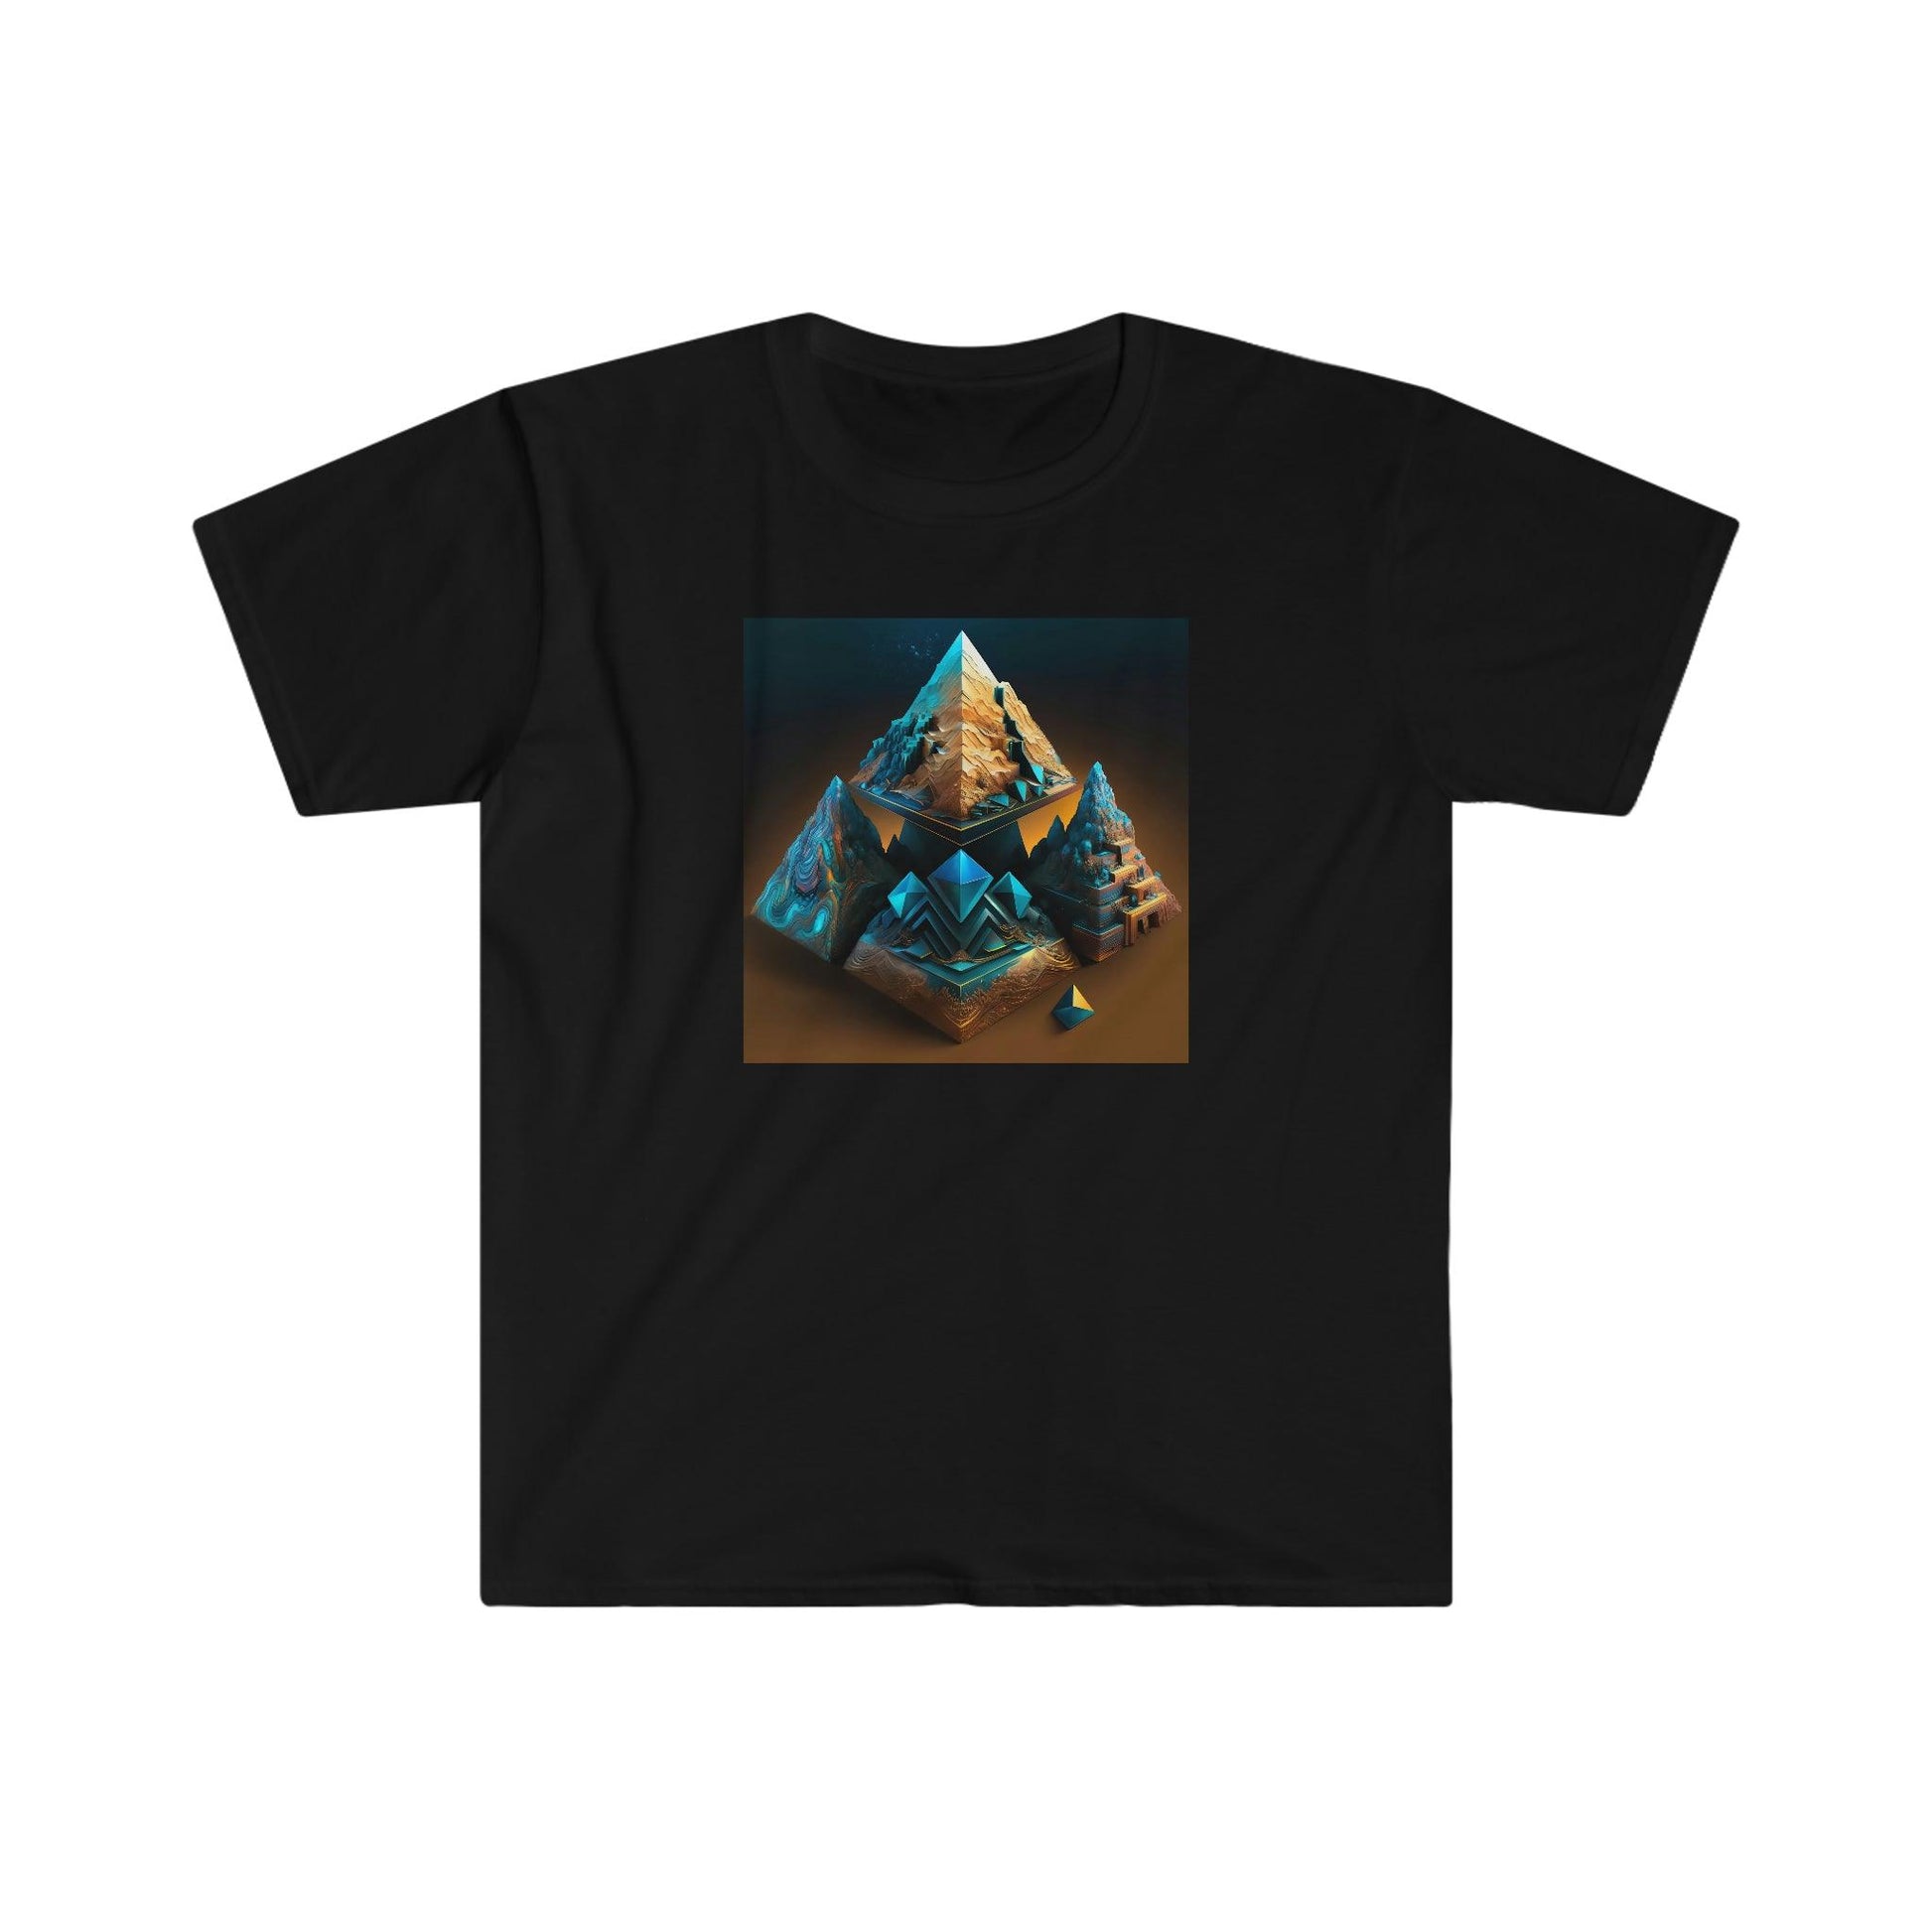 Visionary Ai Art Men's and Women's Unisex Soft Style T-Shirt for Festival and Street Wear Pyramids v3.1 - Alchemystics.org